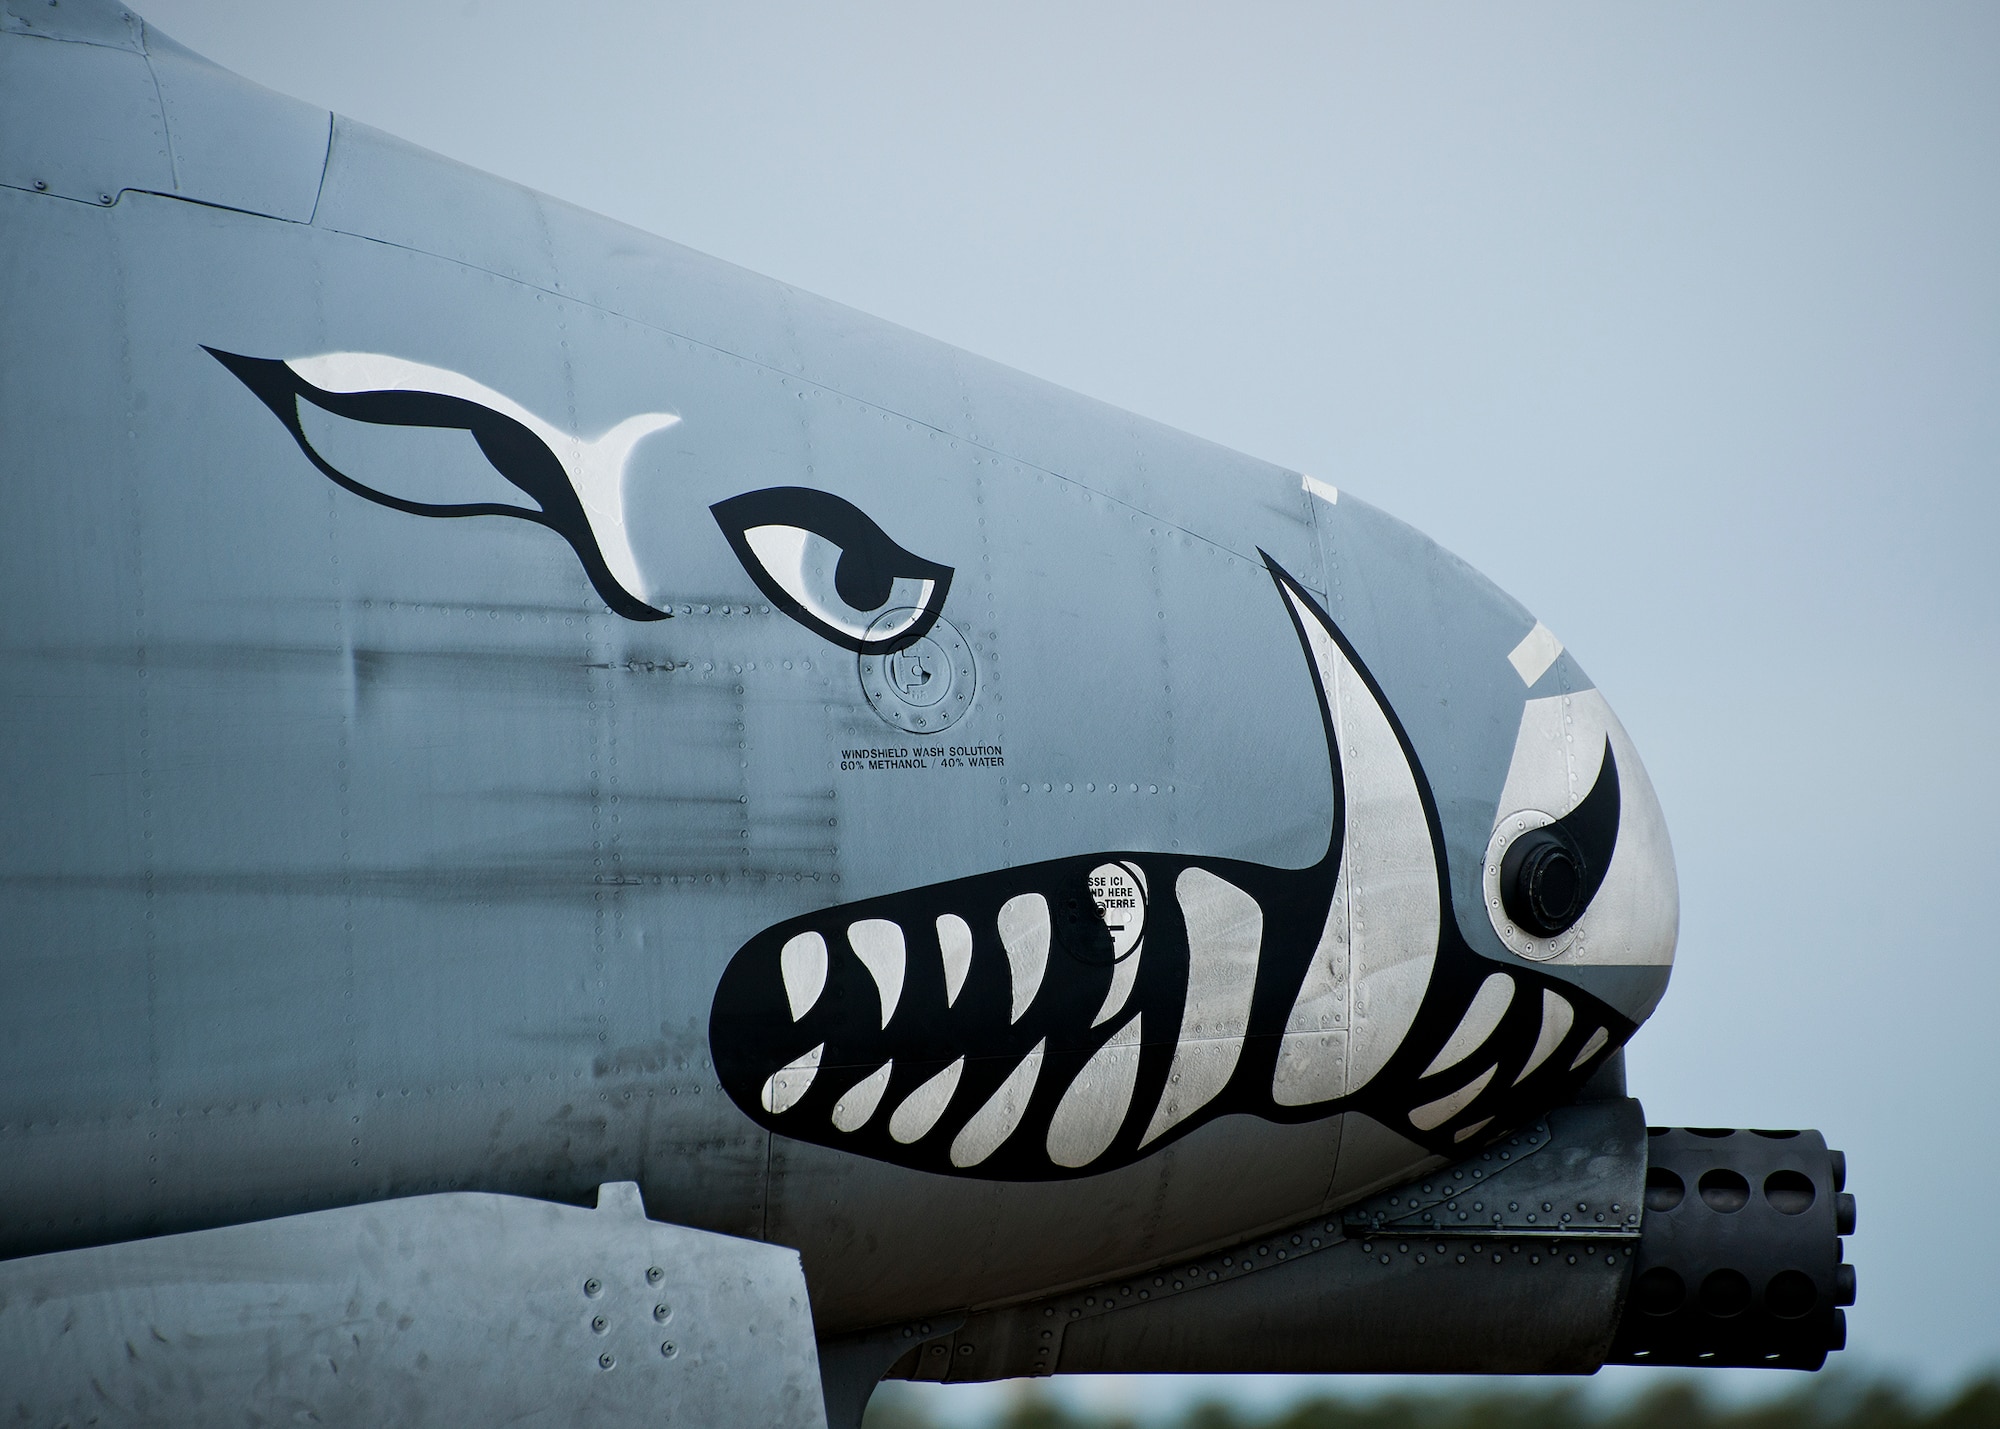 An A-10 Thunderbolt II, formerly assigned to Barksdale Air Force Base, La., but now a part of the 442nd Fighter Wing fleet sits ready for a mission at Eglin Air Force Base, Fla., March 20.  The 442nd A-10s traveled from Whiteman AFB for the week-long, air-to-ground weapons system evaluation program called Combat Hammer.  Combat Hammer, run by the 86th Fighter Weapons Squadron, is used to evaluate the effectiveness and suitability of combat air force weapon systems. The air-to-air and air-to-ground WSEP evaluations are accomplished during tactical deliveries of fighter, bomber and unmanned aircraft system precision guided munitions, on realistic targets with air-to-air and surface-to-air defenses. (U.S. Air Force photo/Samuel King Jr.)